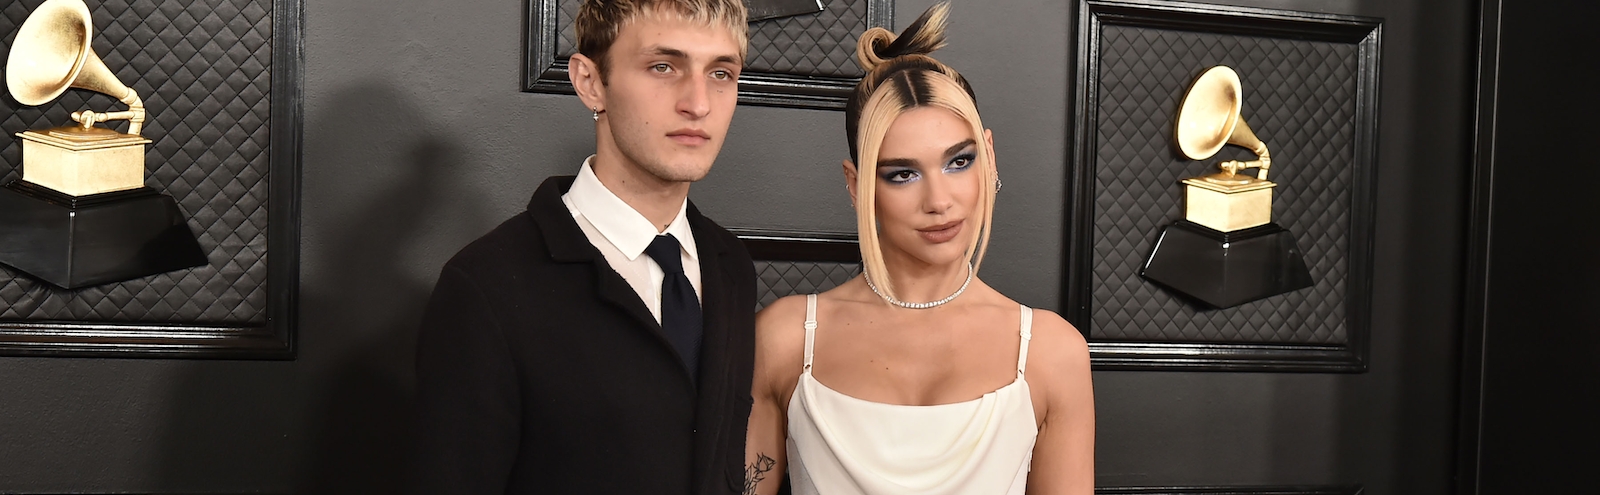 Anwar Hadid's Handbag Collection Is Probably Better Than Yours